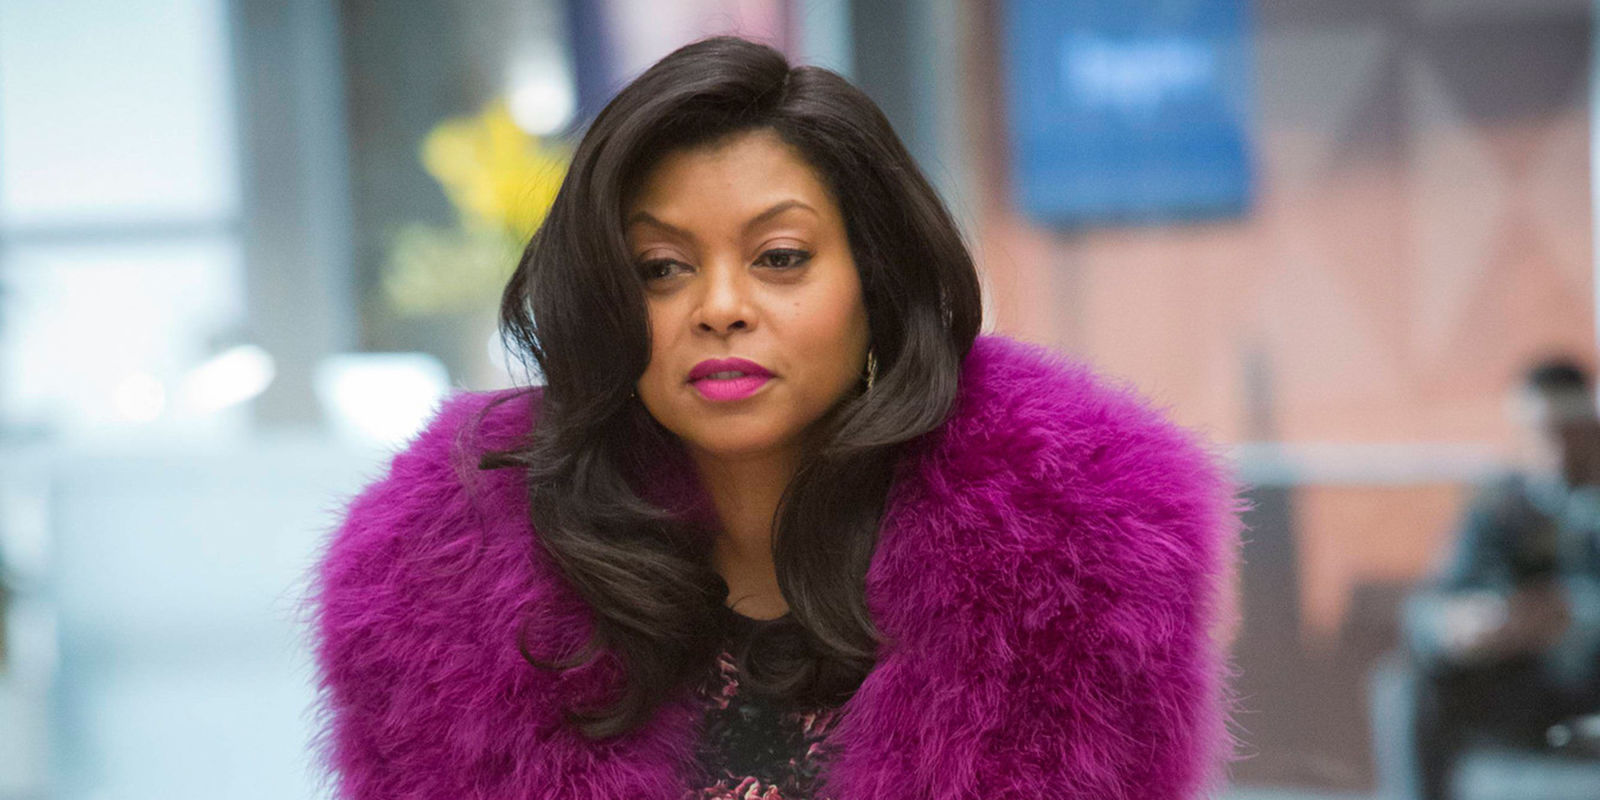 10 Things You May Not Know About Taraji P. Henson.